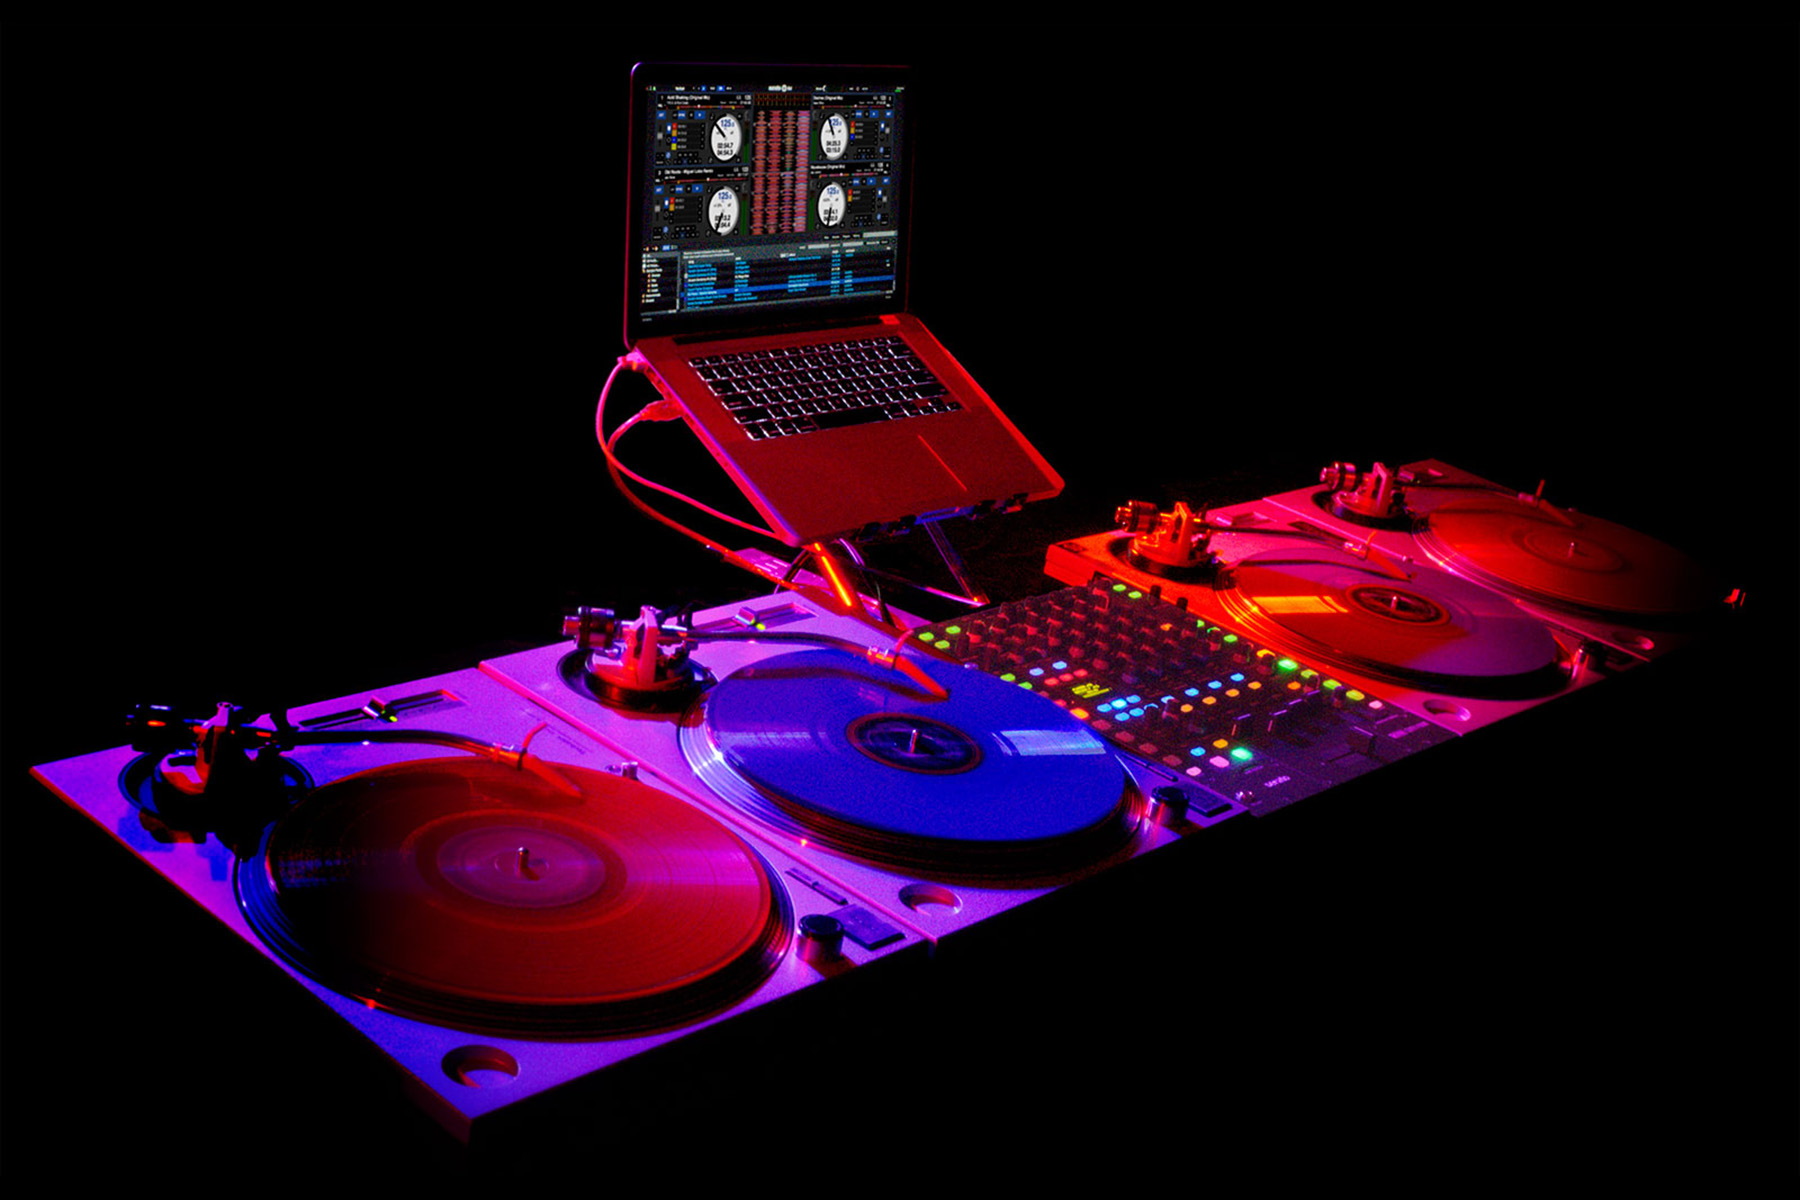 Serato Dj Software Provides Intuitive Control Of Features